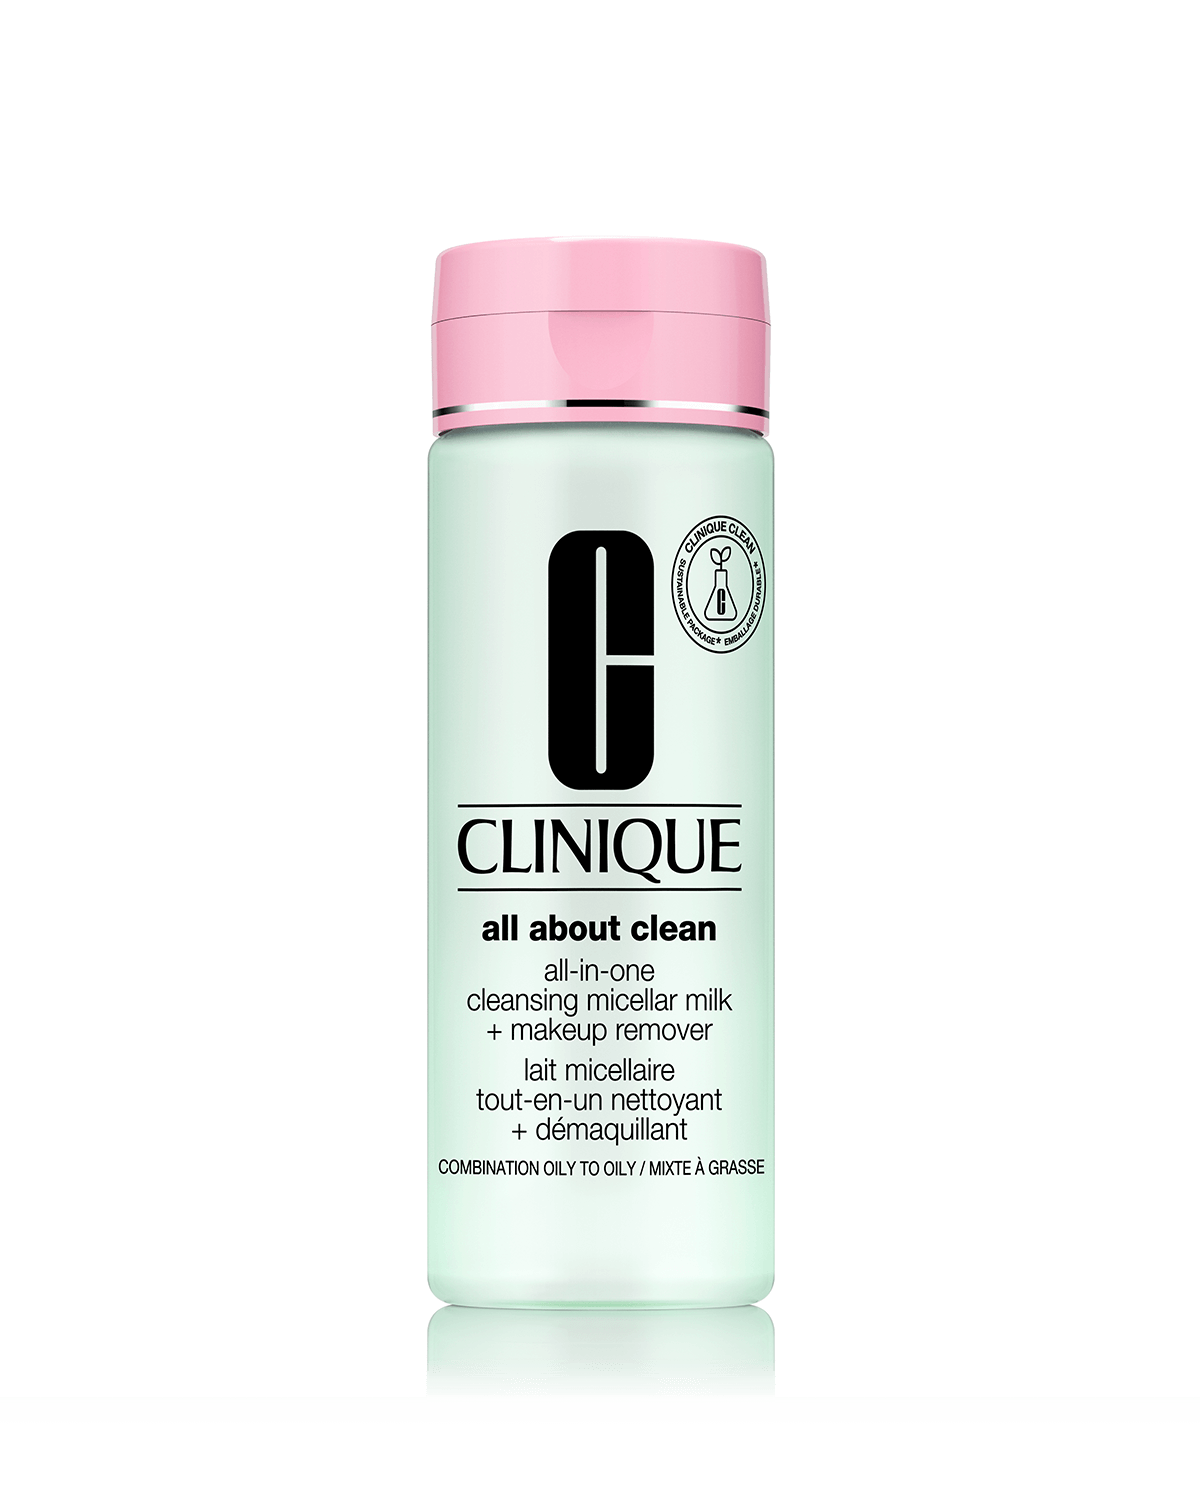 All-in-One Cleansing Micellar Milk + Makeup Remover